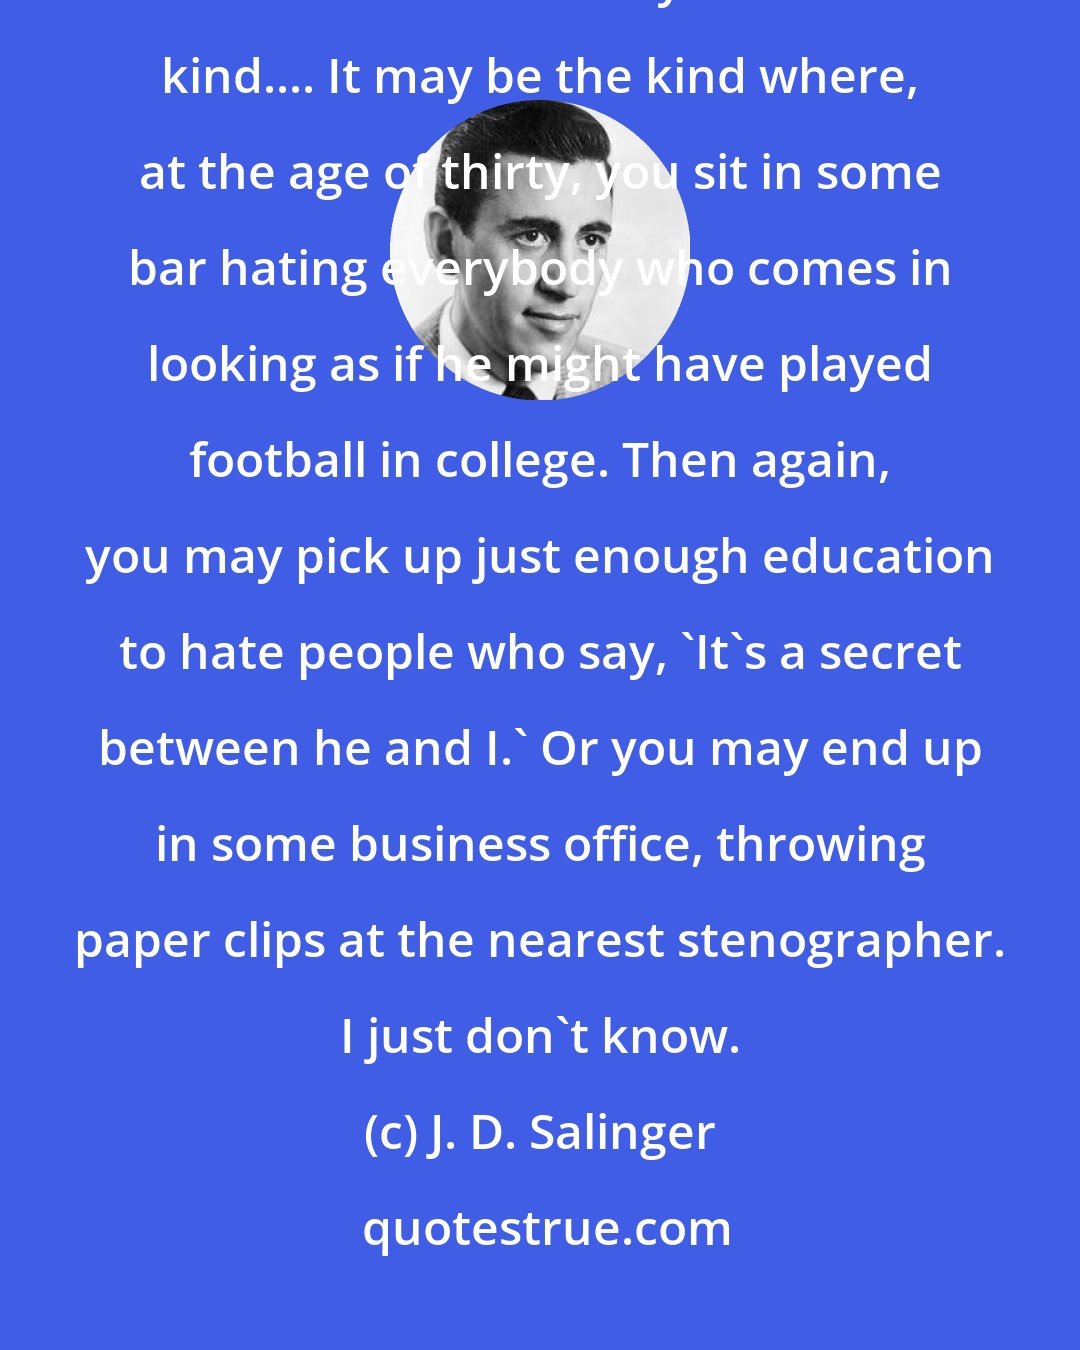 J. D. Salinger: I have a feeling that you're riding for some kind of a terrible, terrible fall. But I don't honestly know what kind.... It may be the kind where, at the age of thirty, you sit in some bar hating everybody who comes in looking as if he might have played football in college. Then again, you may pick up just enough education to hate people who say, 'It's a secret between he and I.' Or you may end up in some business office, throwing paper clips at the nearest stenographer. I just don't know.